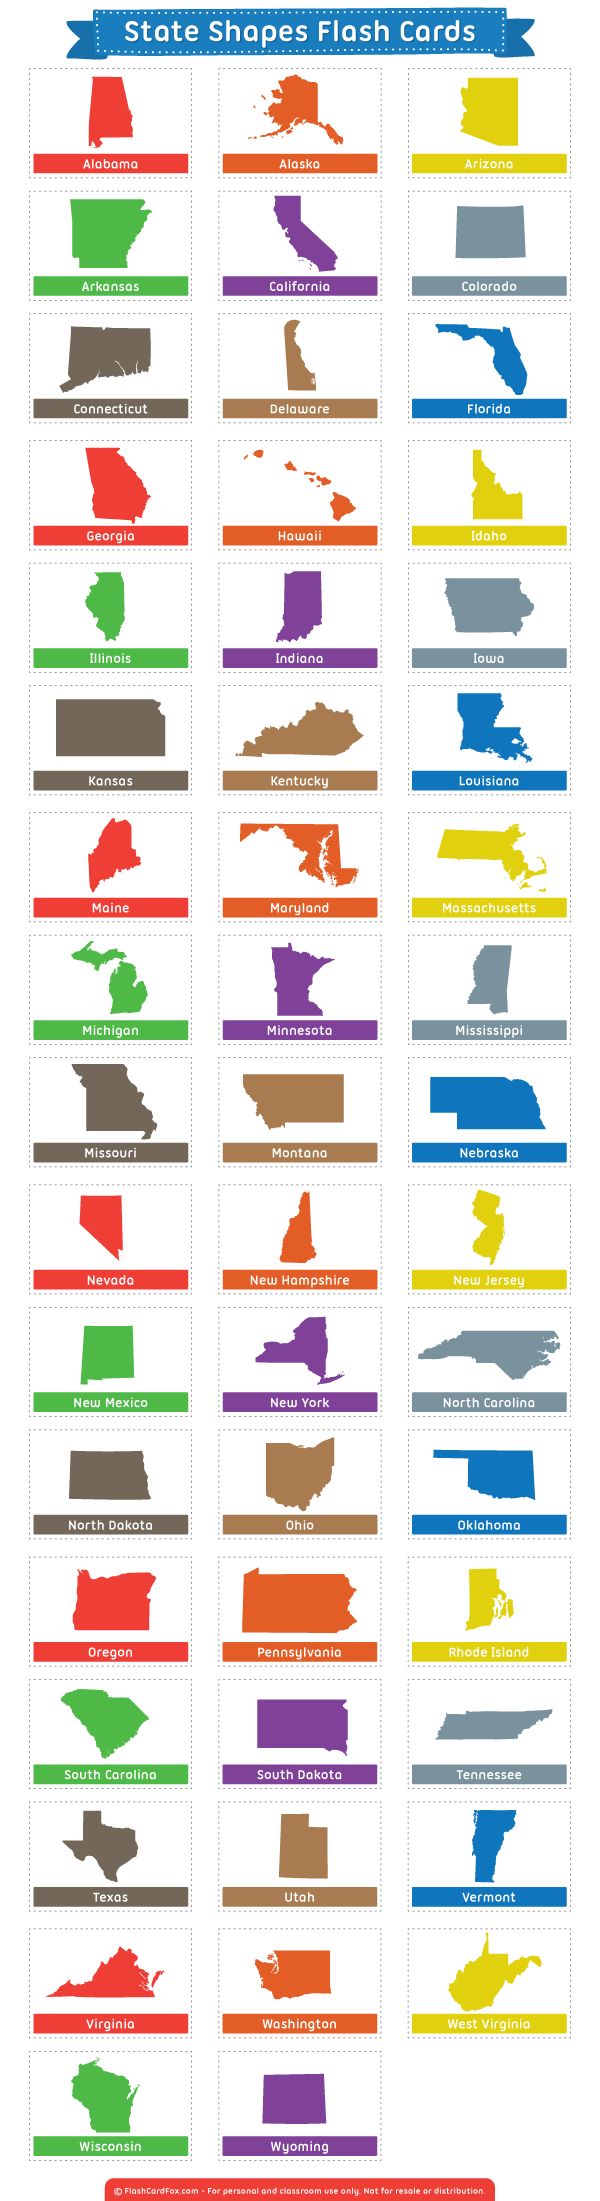 Printable State Shapes Flash Cards